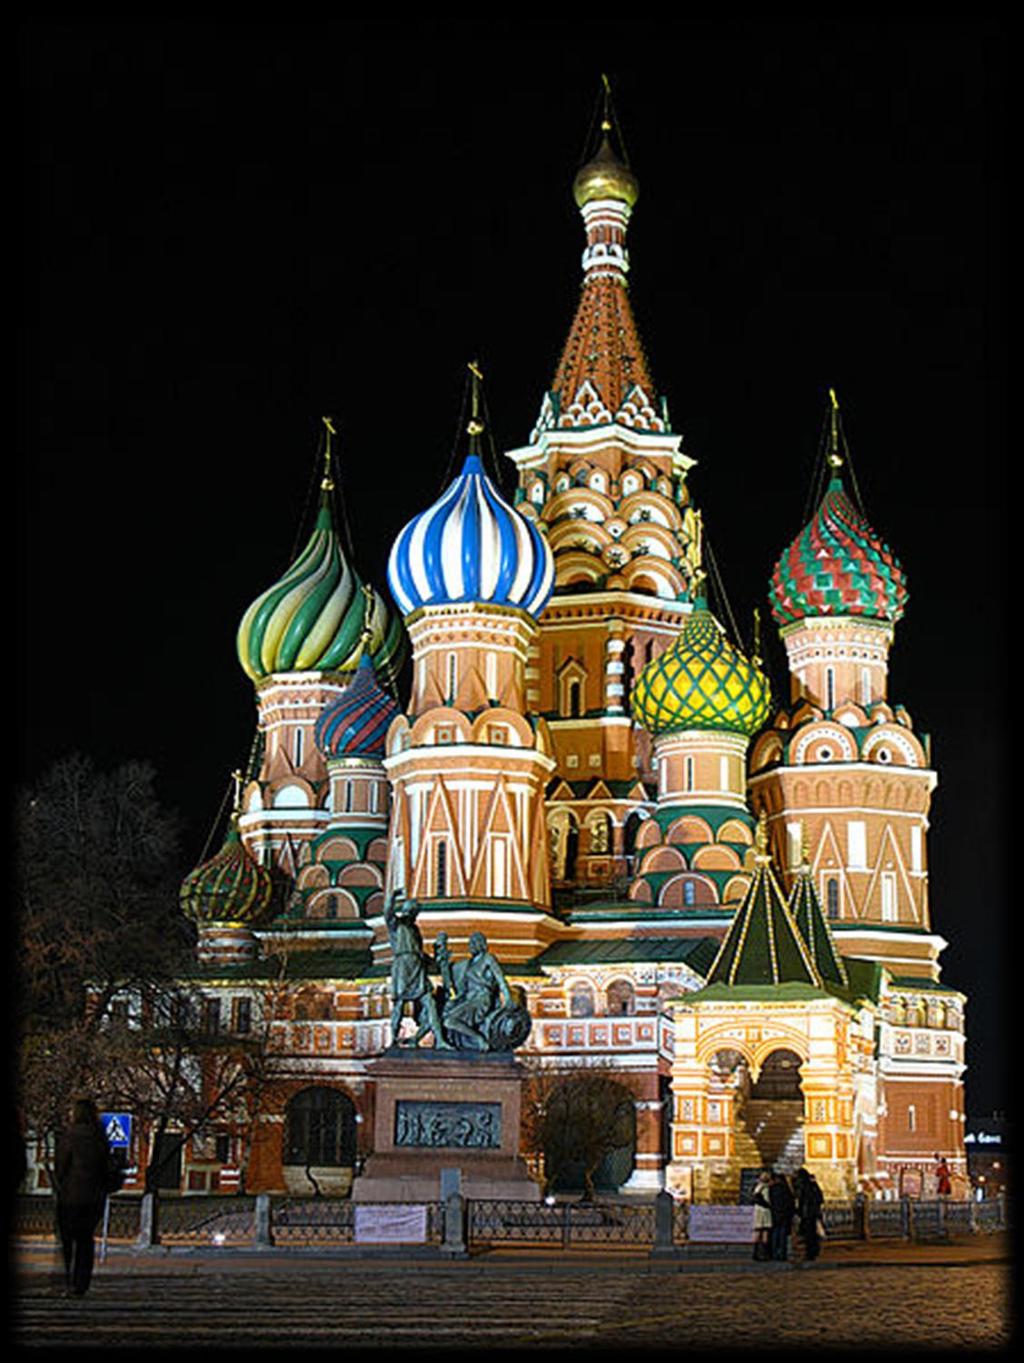 St. Basil s Cathedral: Ivan IV ordered the construction of the church to commemorate